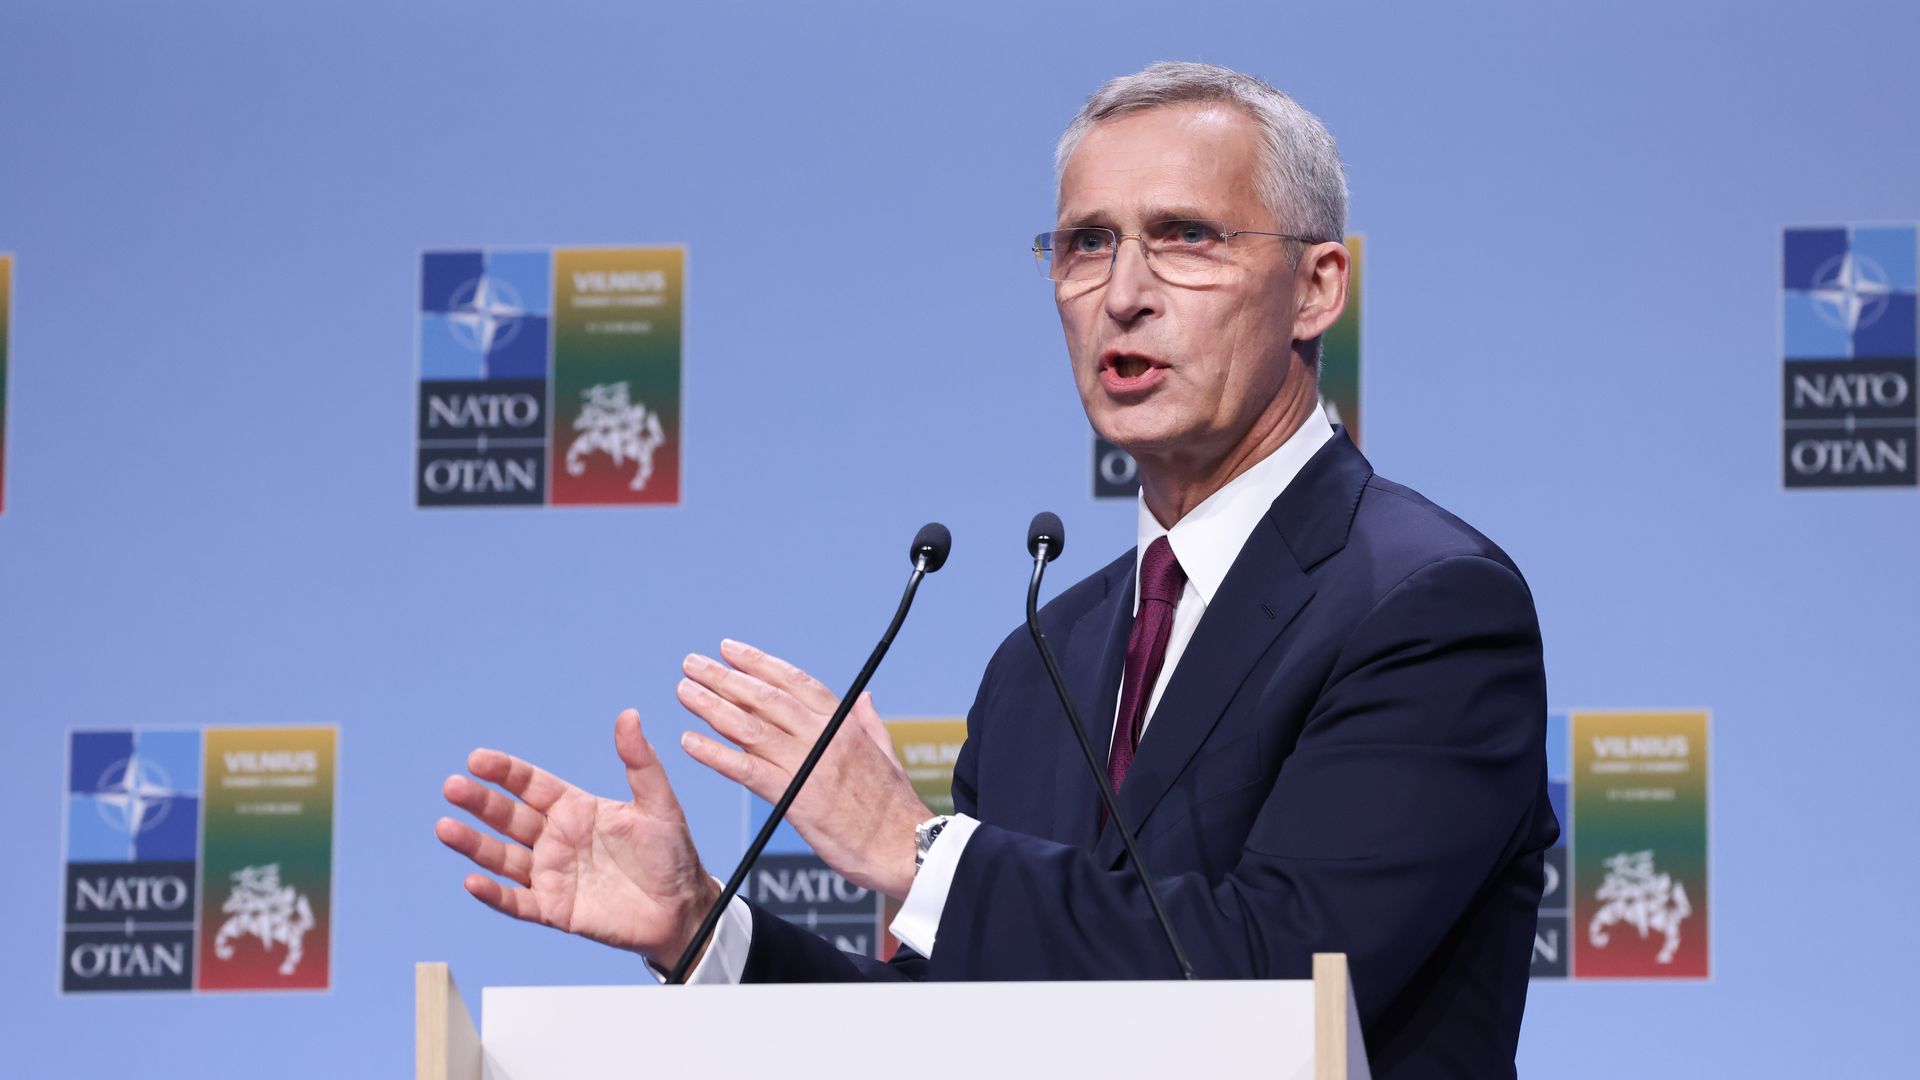 Jens Stoltenberg, secretary general of the North Atlantic Treaty Organization (NATO), during a news conference on the opening day of the annual NATO Summit